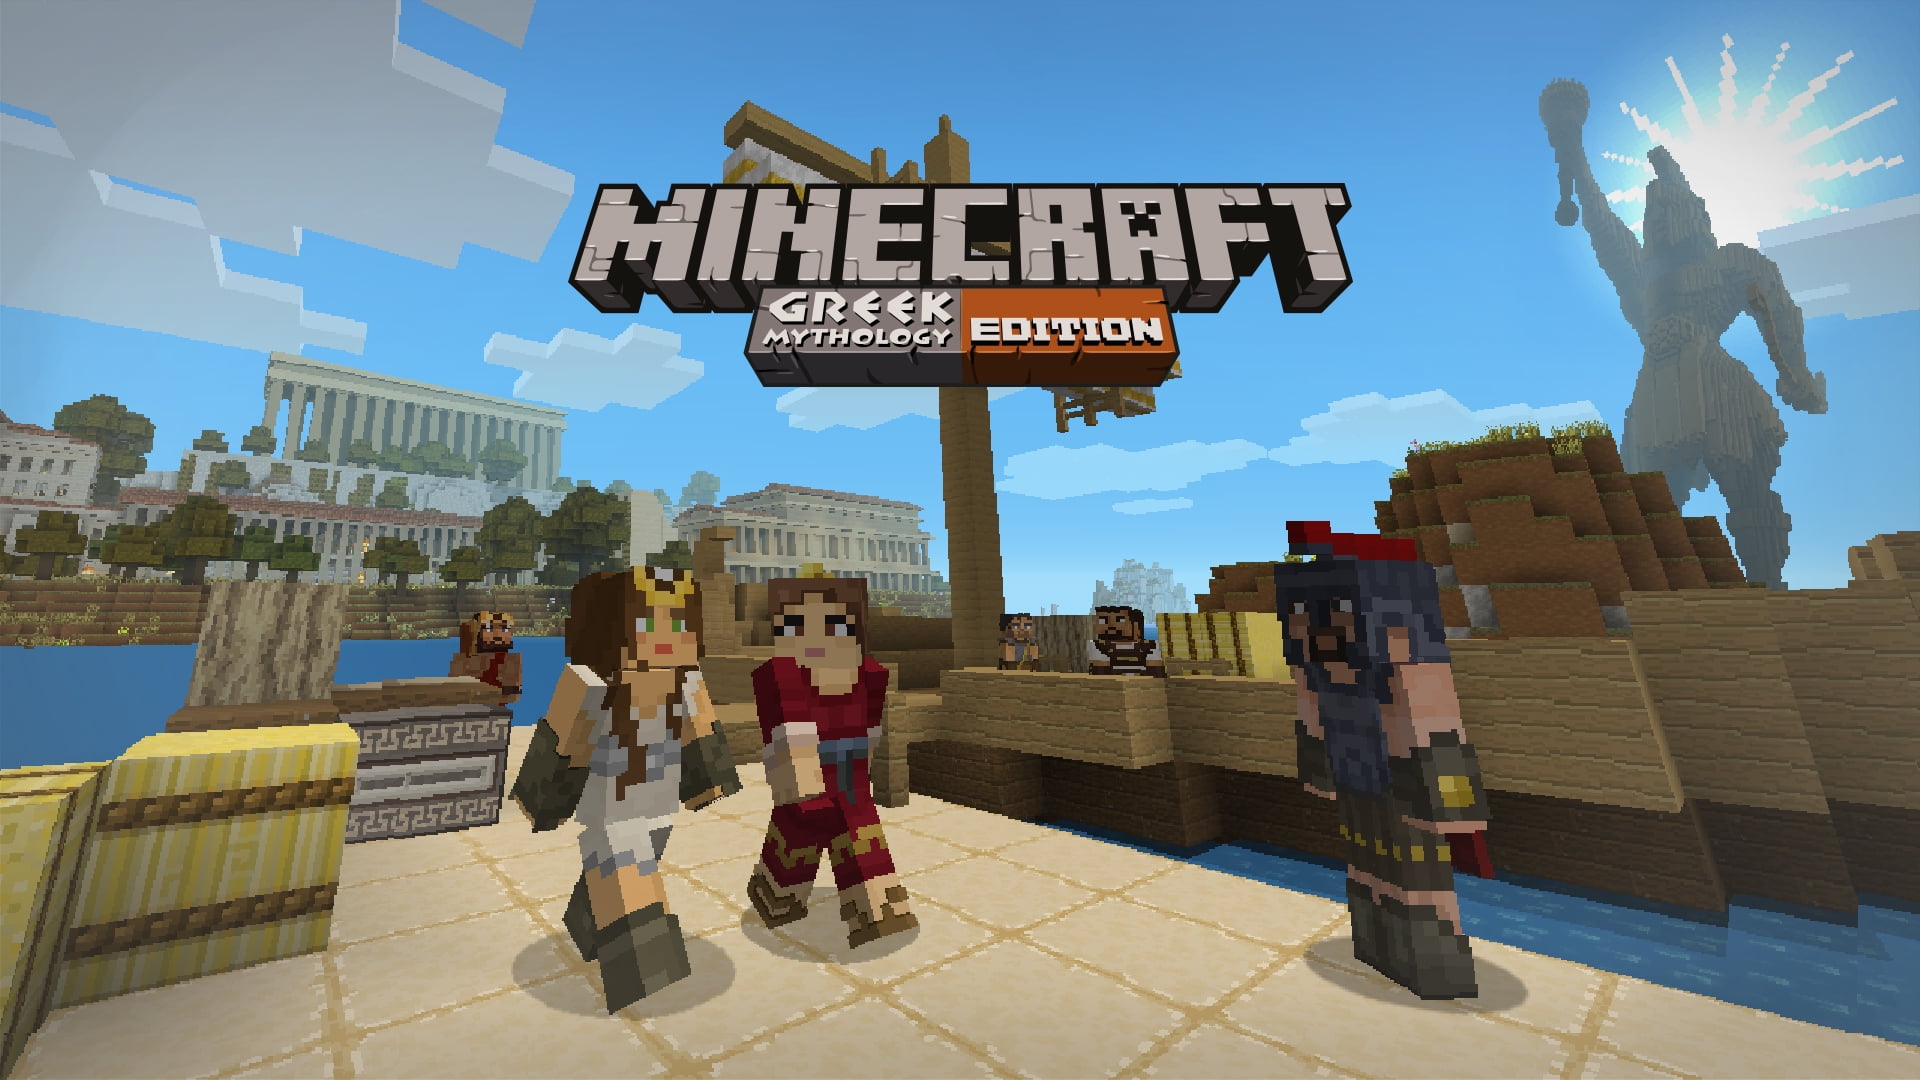 Minecraft Starter Collection-PS4 - Ibyte